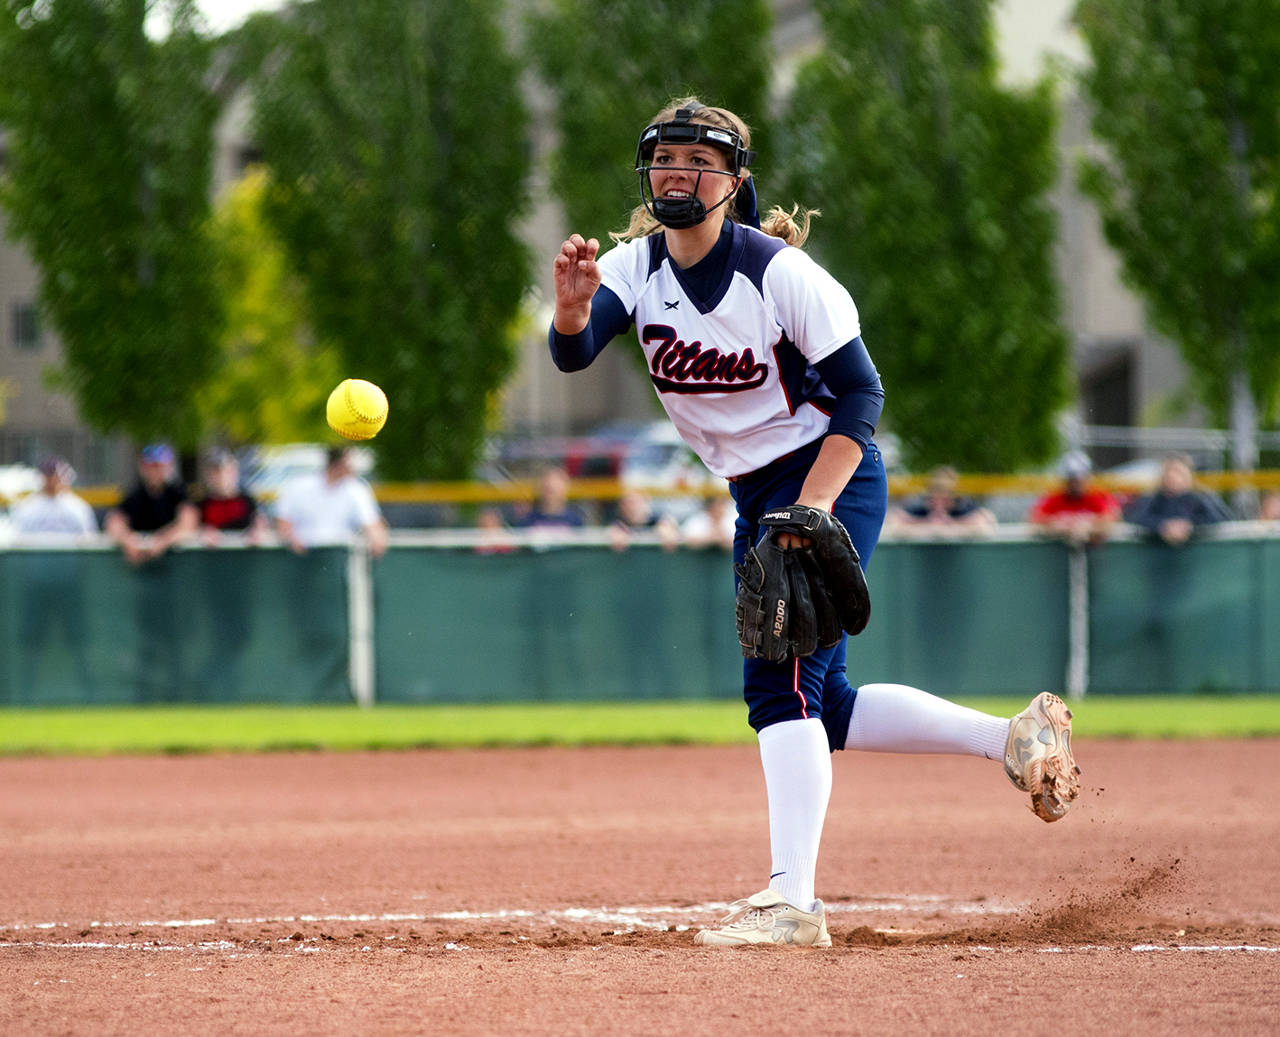 PWV senior Kamryn Adkins hurls a pitch during the Titan’s 9-7 loss to the Adna Pirates in the 2B State championship game on Saturday at the Gateway Sports Complex in Yakima. (Photo by Matt Baide | The Chronicle)